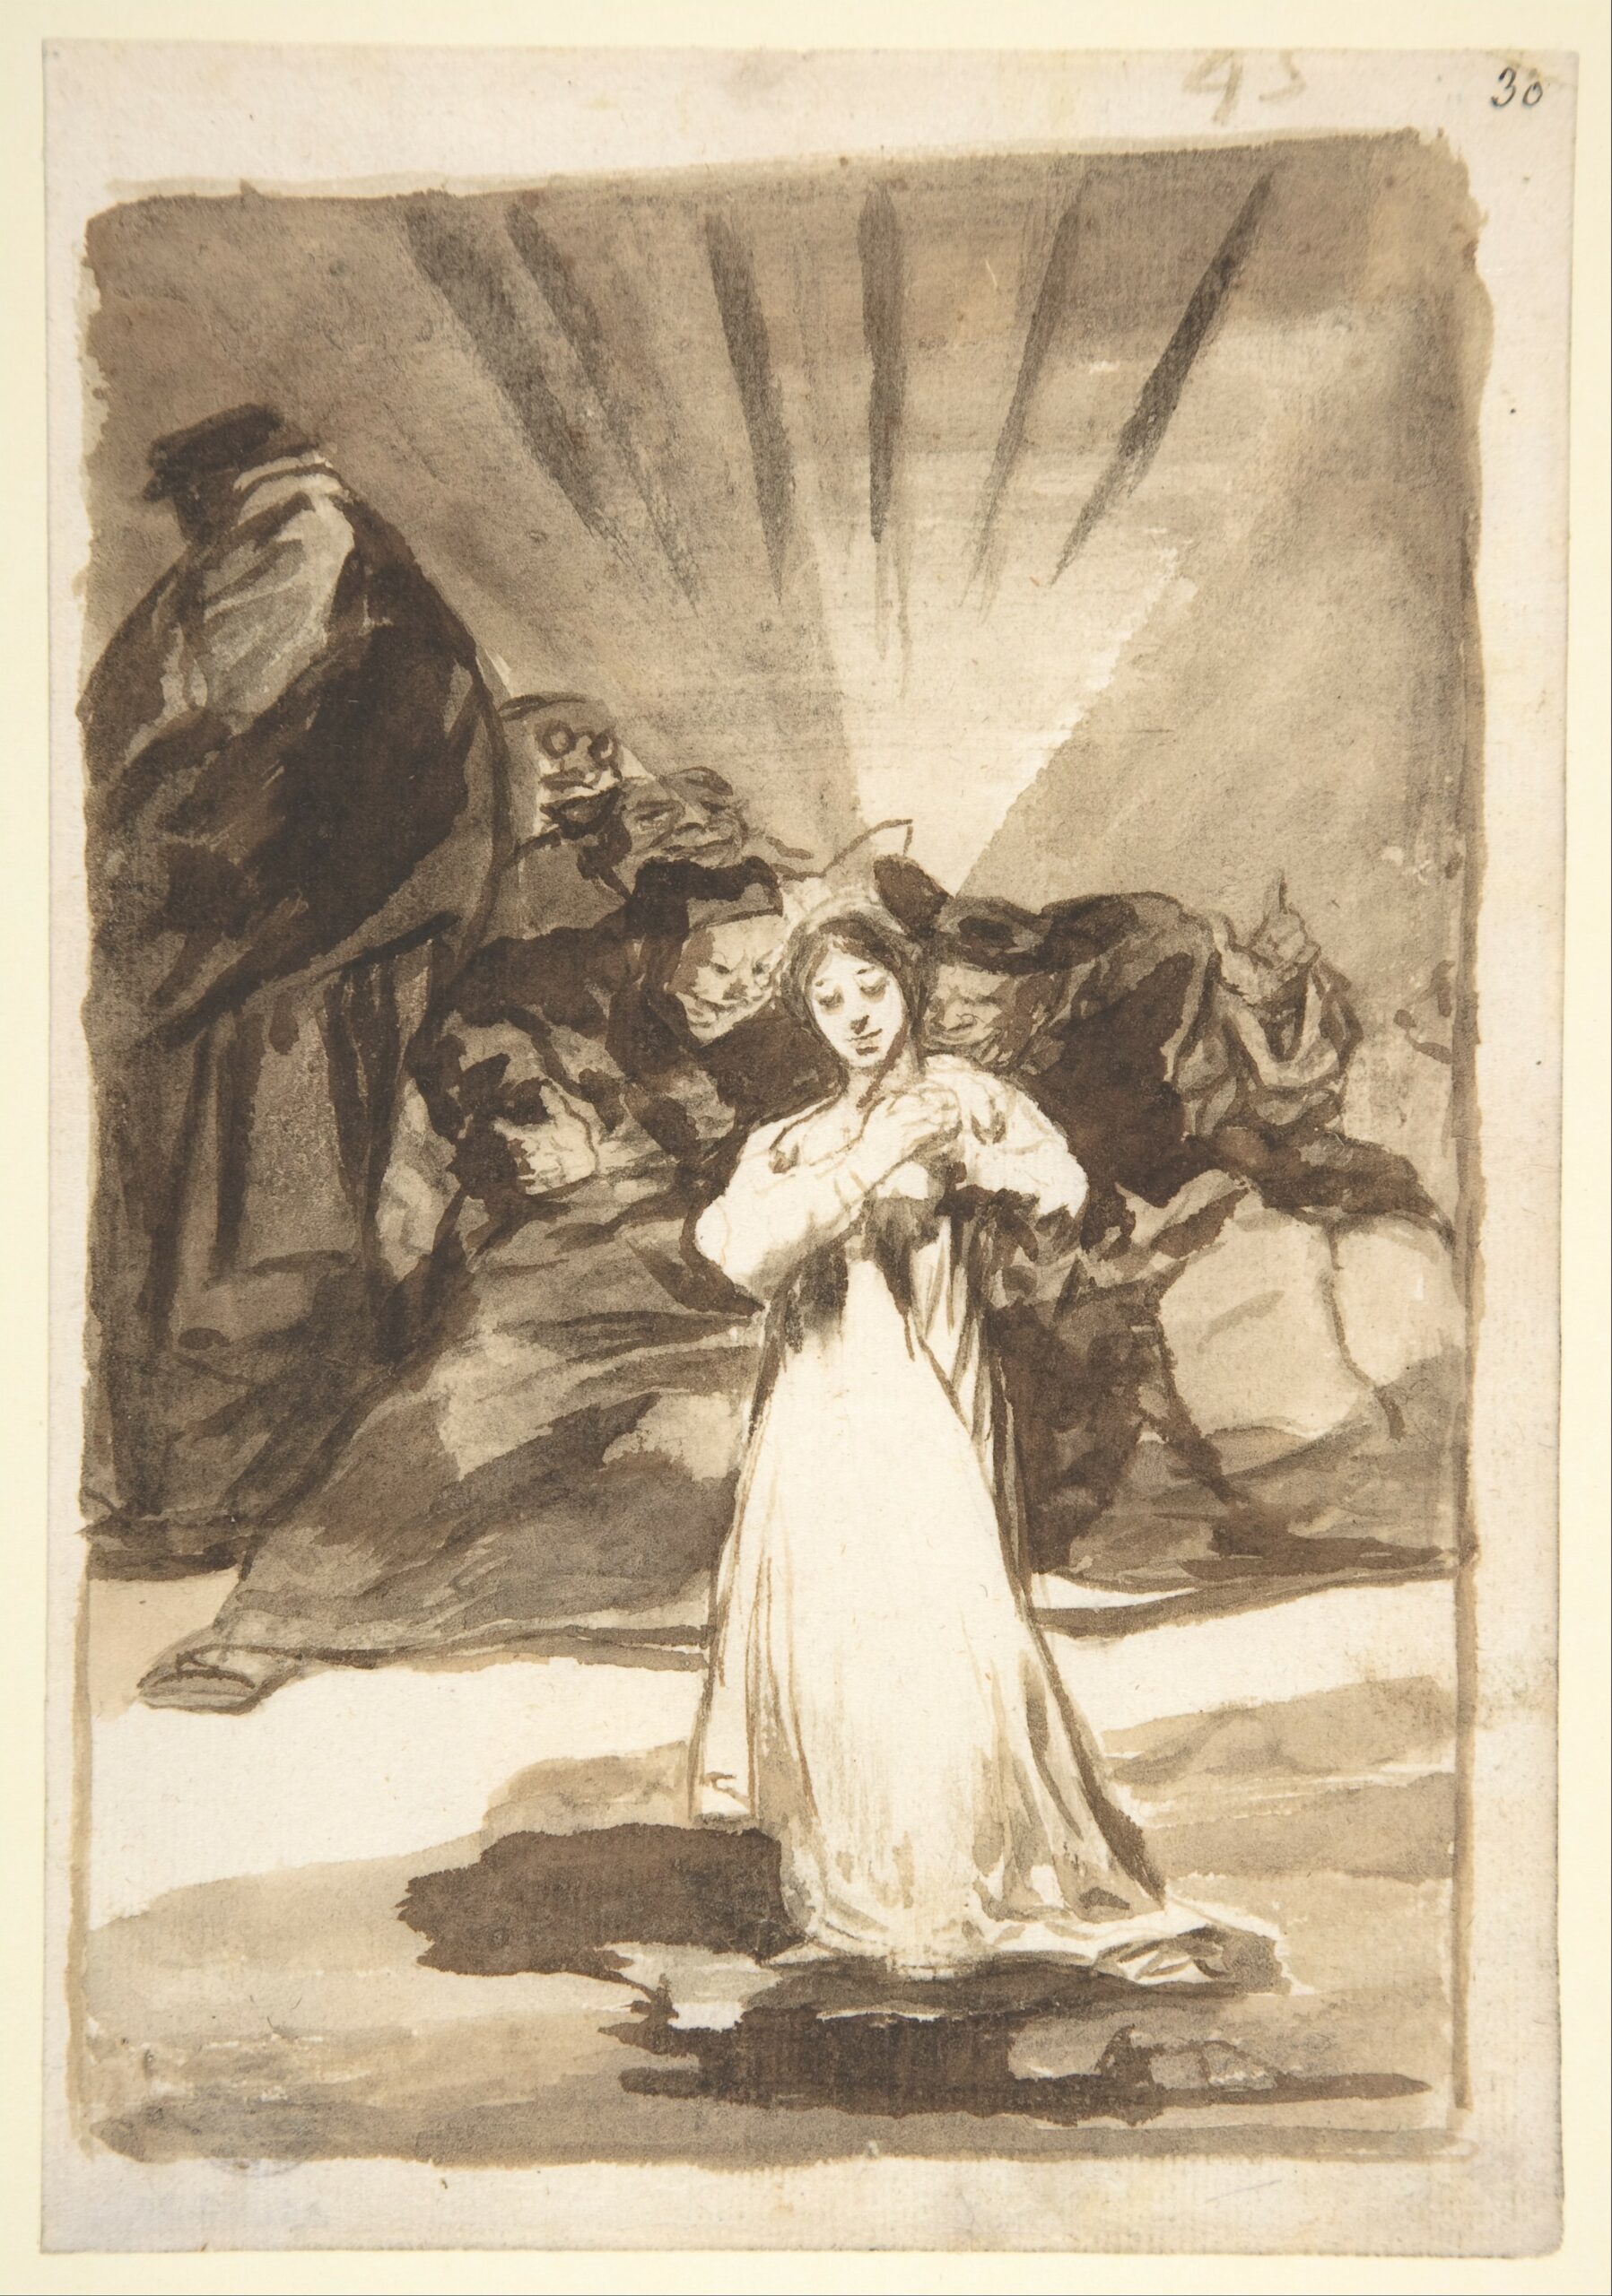 In the print the radiant woman is on the ground, whereas in this drawing she stands with her hands over her heart and is beset by a group of men in dark clothing, including a priest identifiable by his hat.